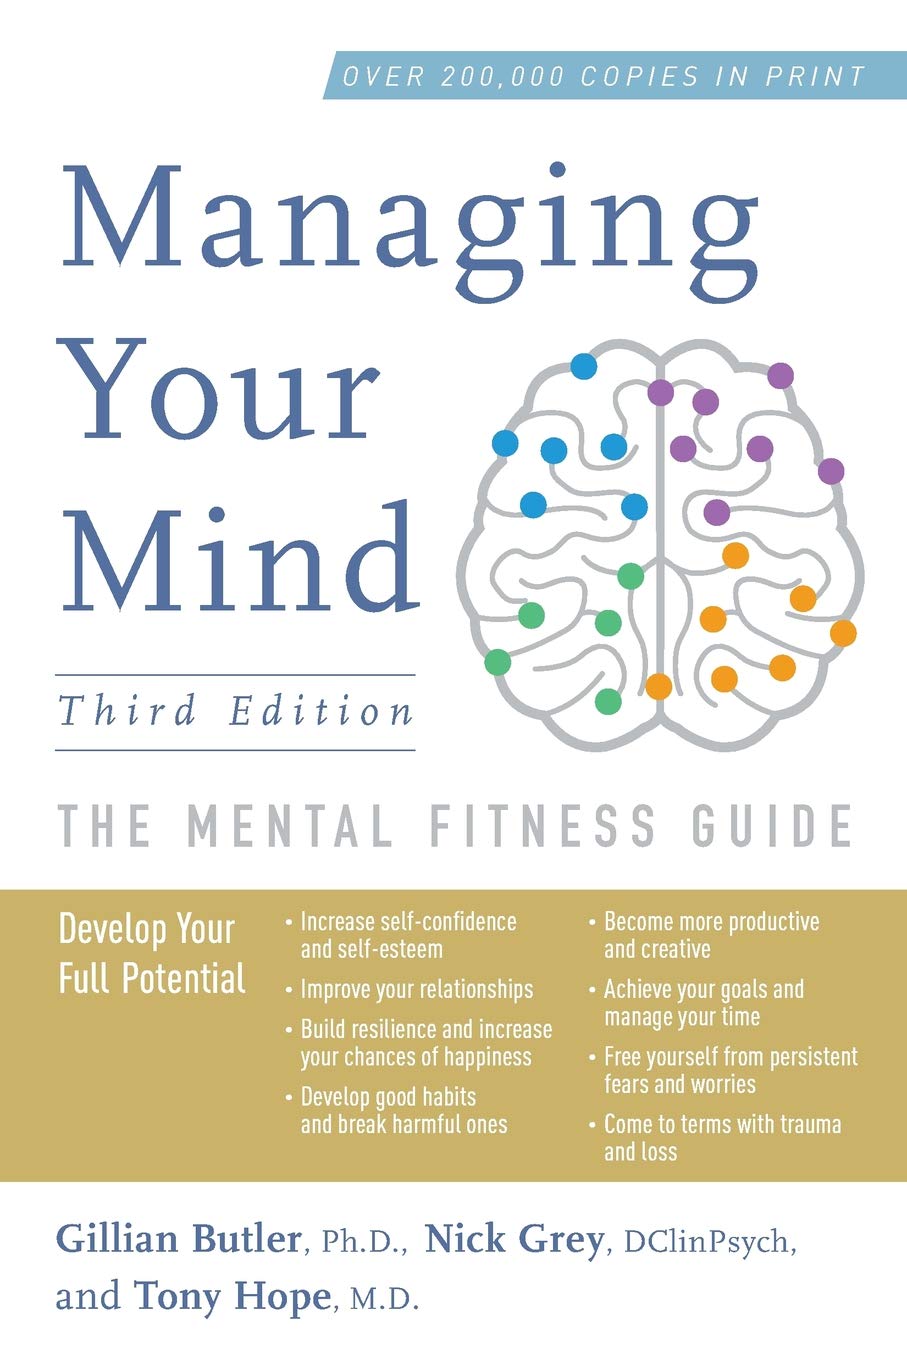 Managing Your Mind The Mental Fitness Guide (2018) ebooksz